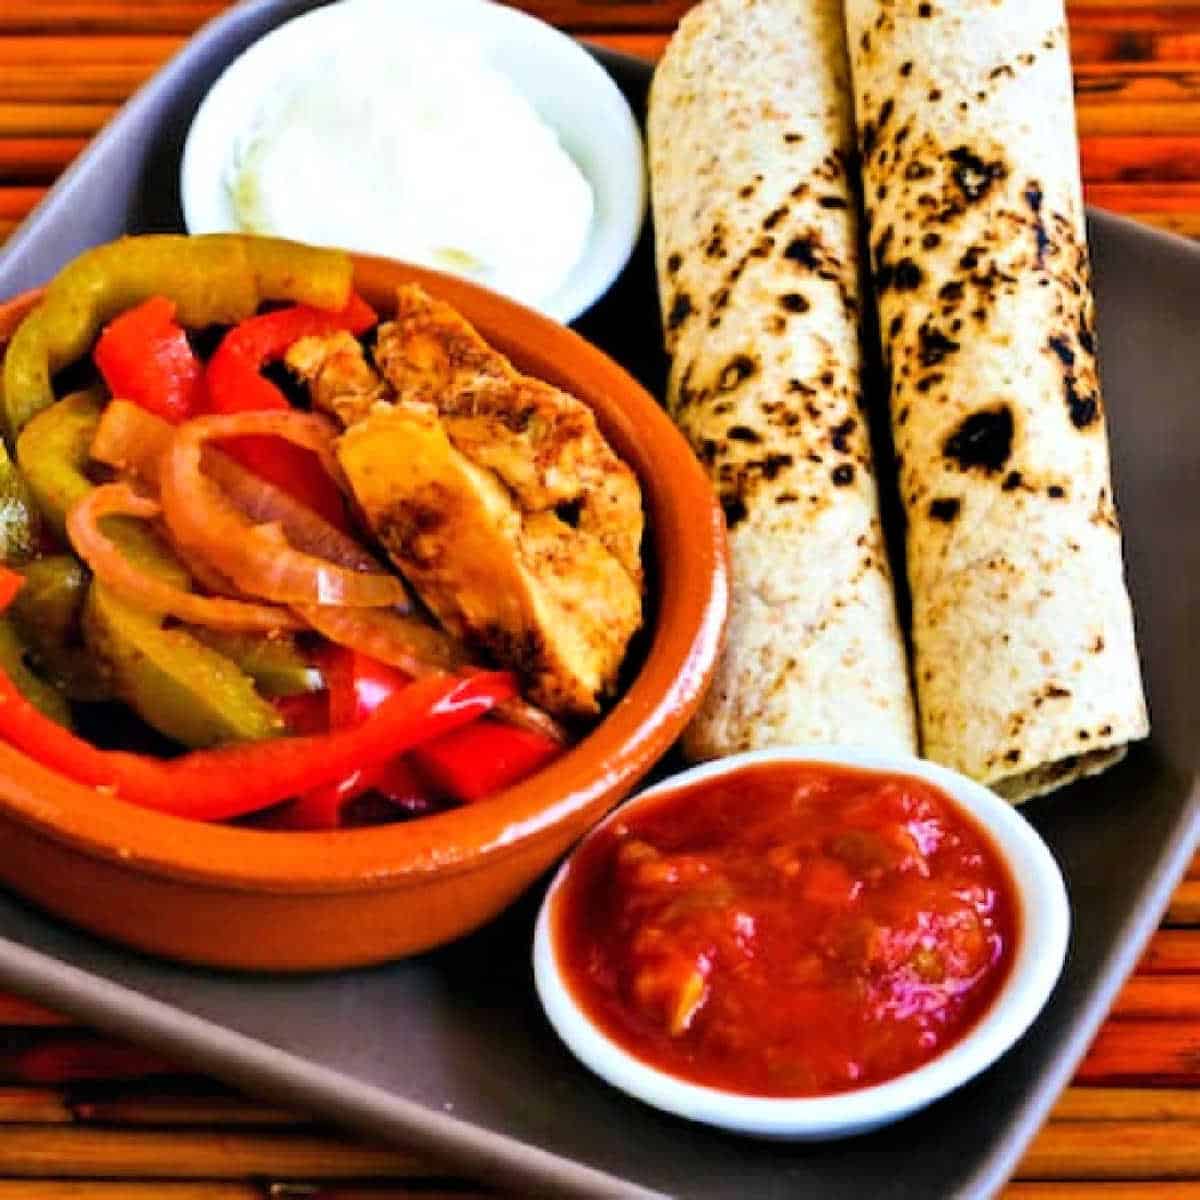 Slow-cooker chicken fajitas are presented with one serving on a square plate.